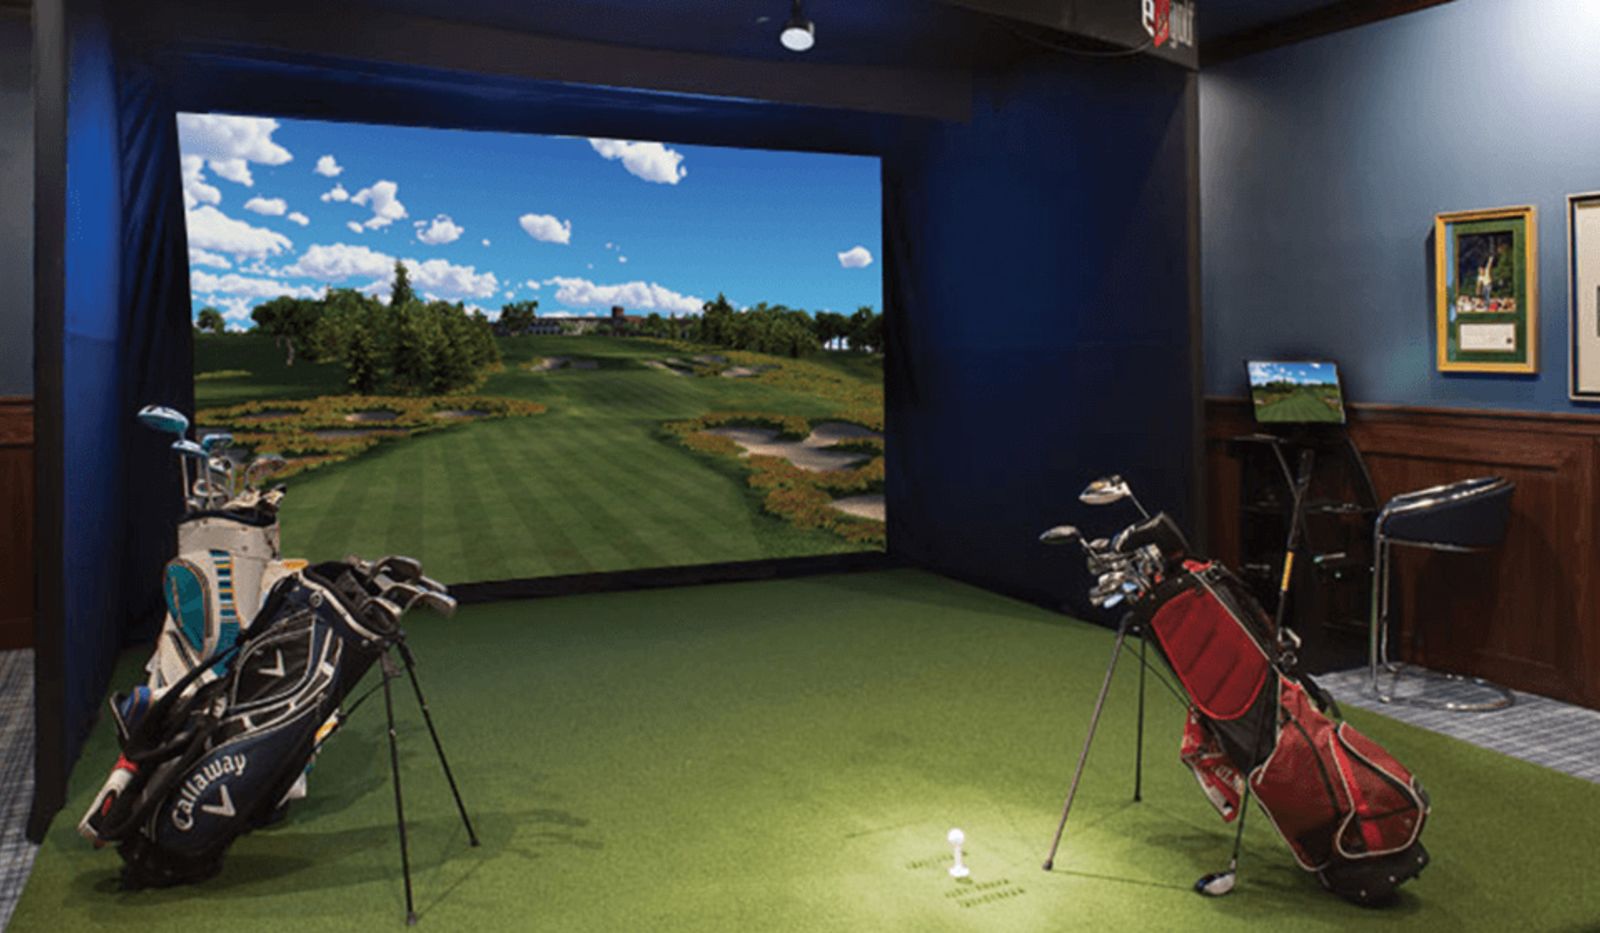 Golf Gifts & Gallery, Powers Lake WI